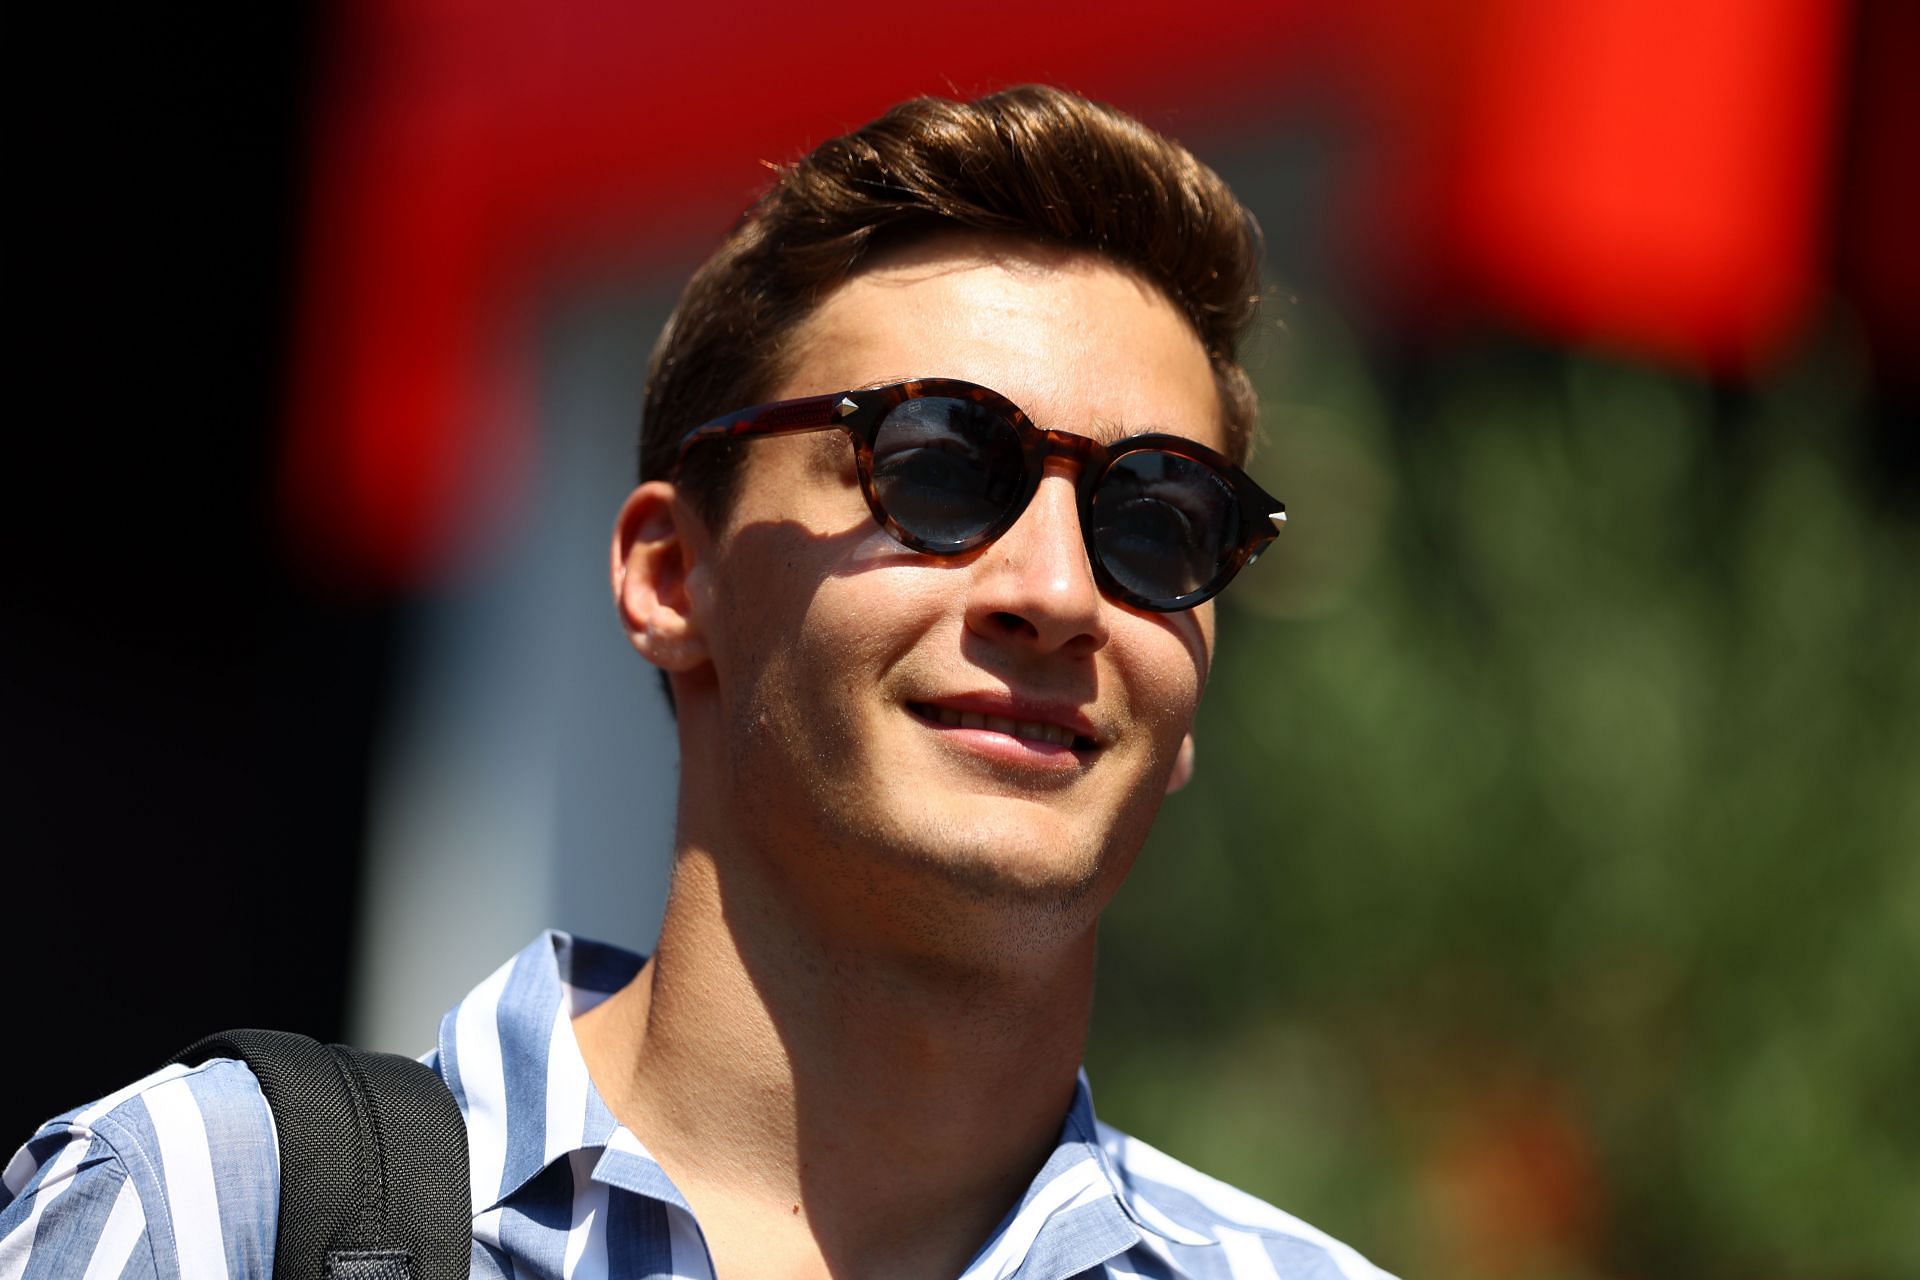 George Russell walks in the Paddock during previews ahead of the F1 Grand Prix of France at Circuit Paul Ricard on July 21, 2022, in Le Castellet, France. (Photo by Clive Rose/Getty Images)